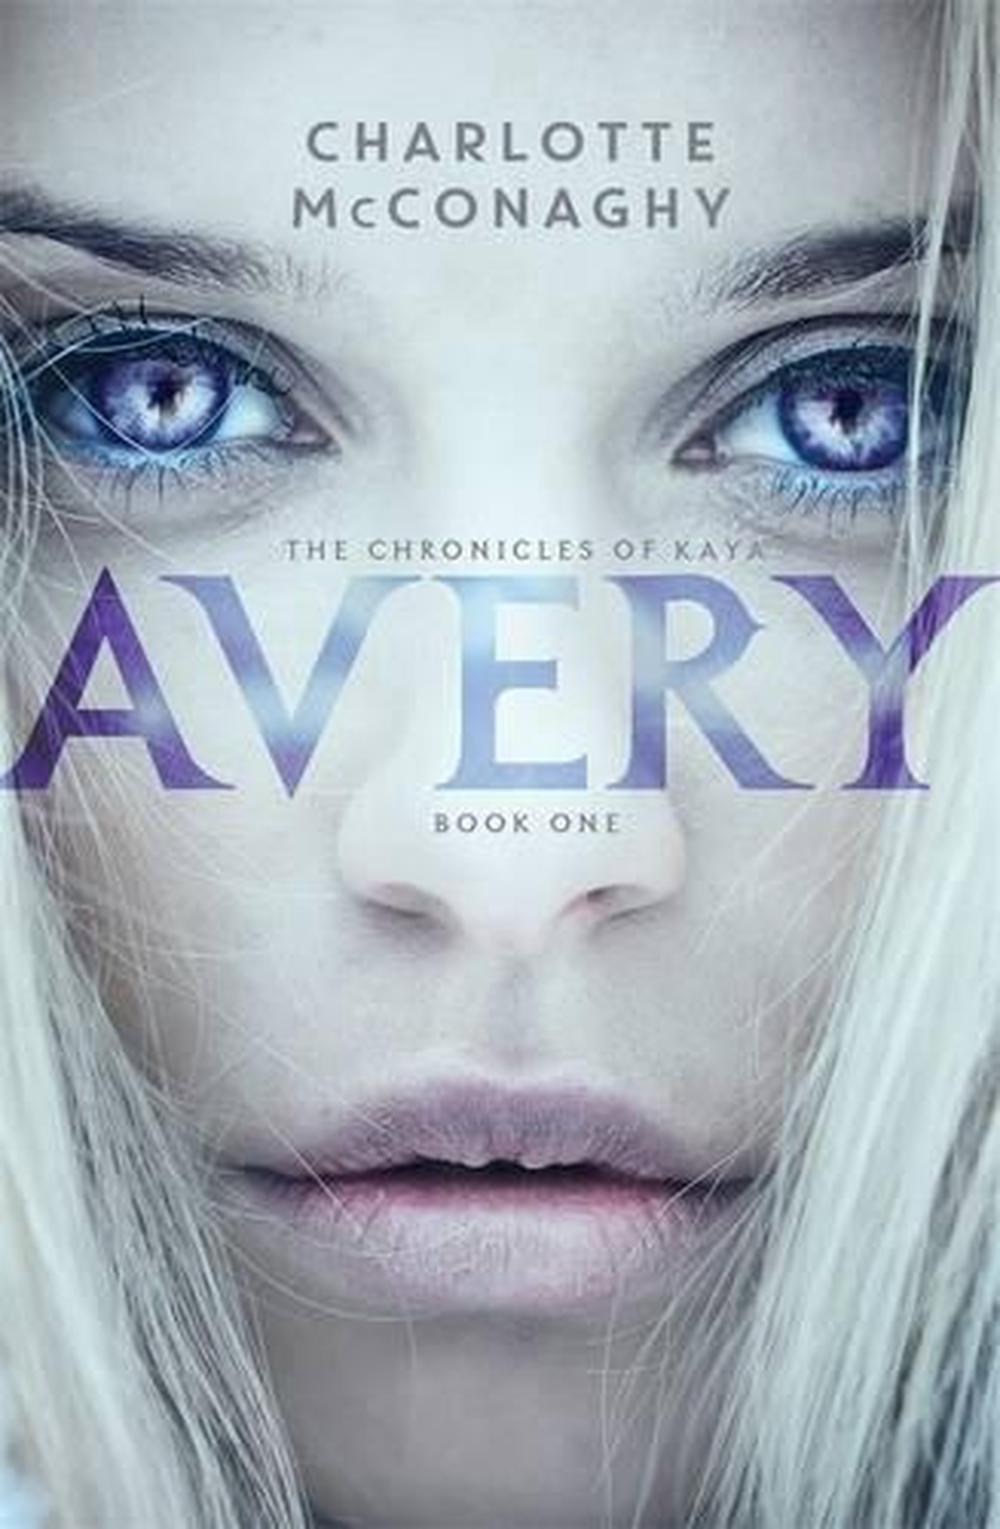 Avery By Charlotte Mcconaghy Paperback 9780857987419 Buy Online At 